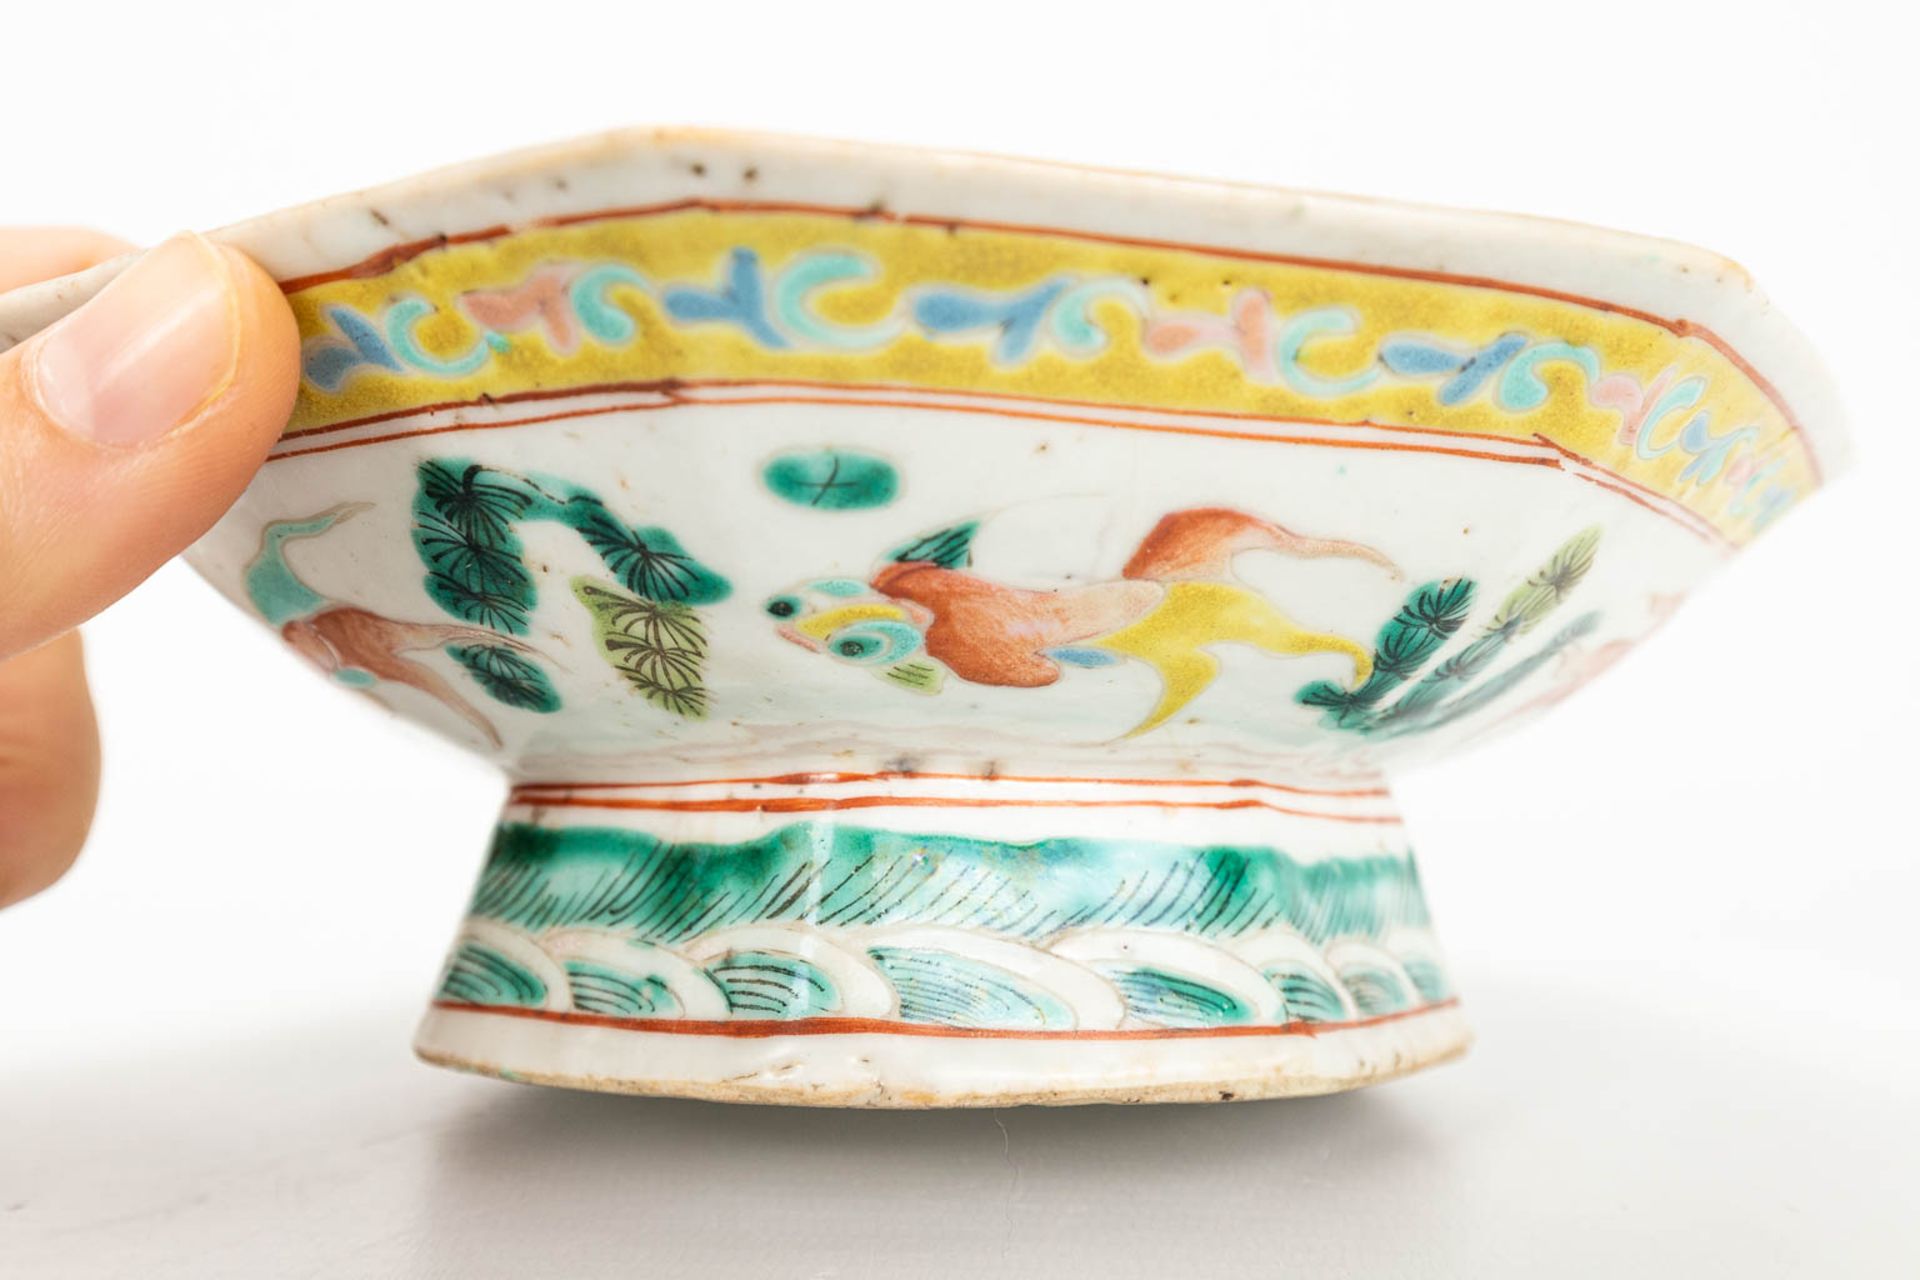 A set of 4 items made of Chinese porcelain. 2 small bowls and 2 ginger jars without lids. - Image 10 of 23